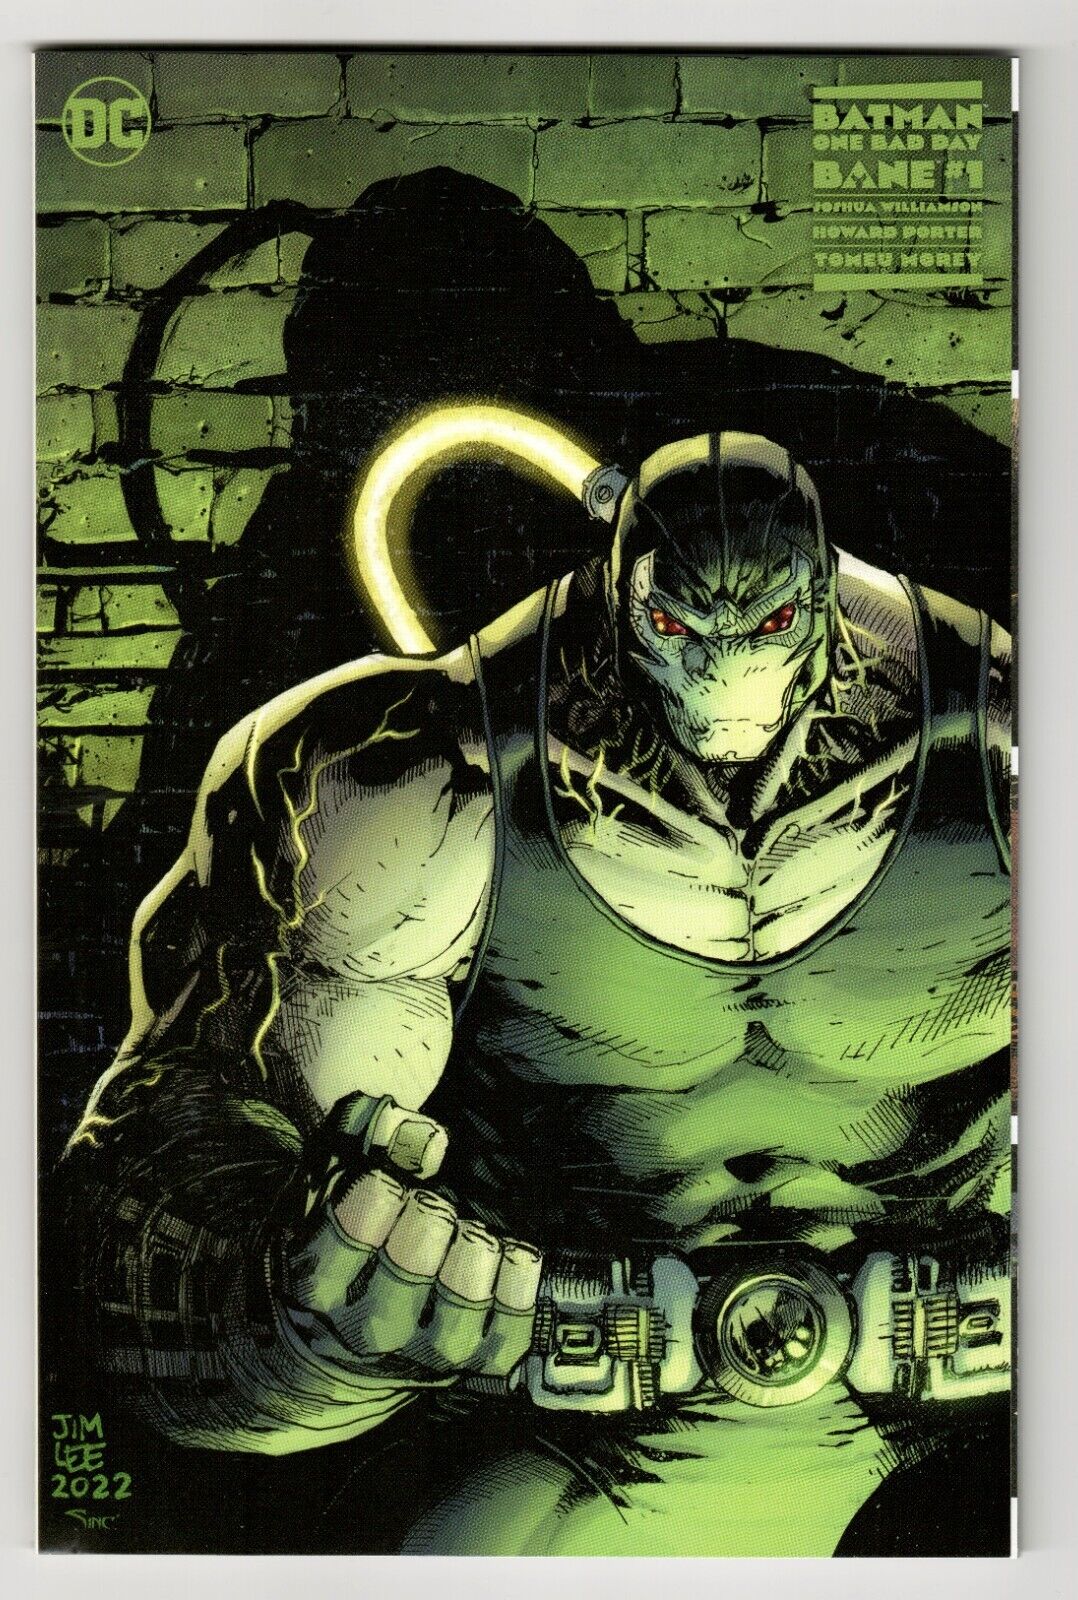 Batman: One Bad Day-Bane #1 DC⋅2023 1st App of Grudge, an adversary of Bane 🔑